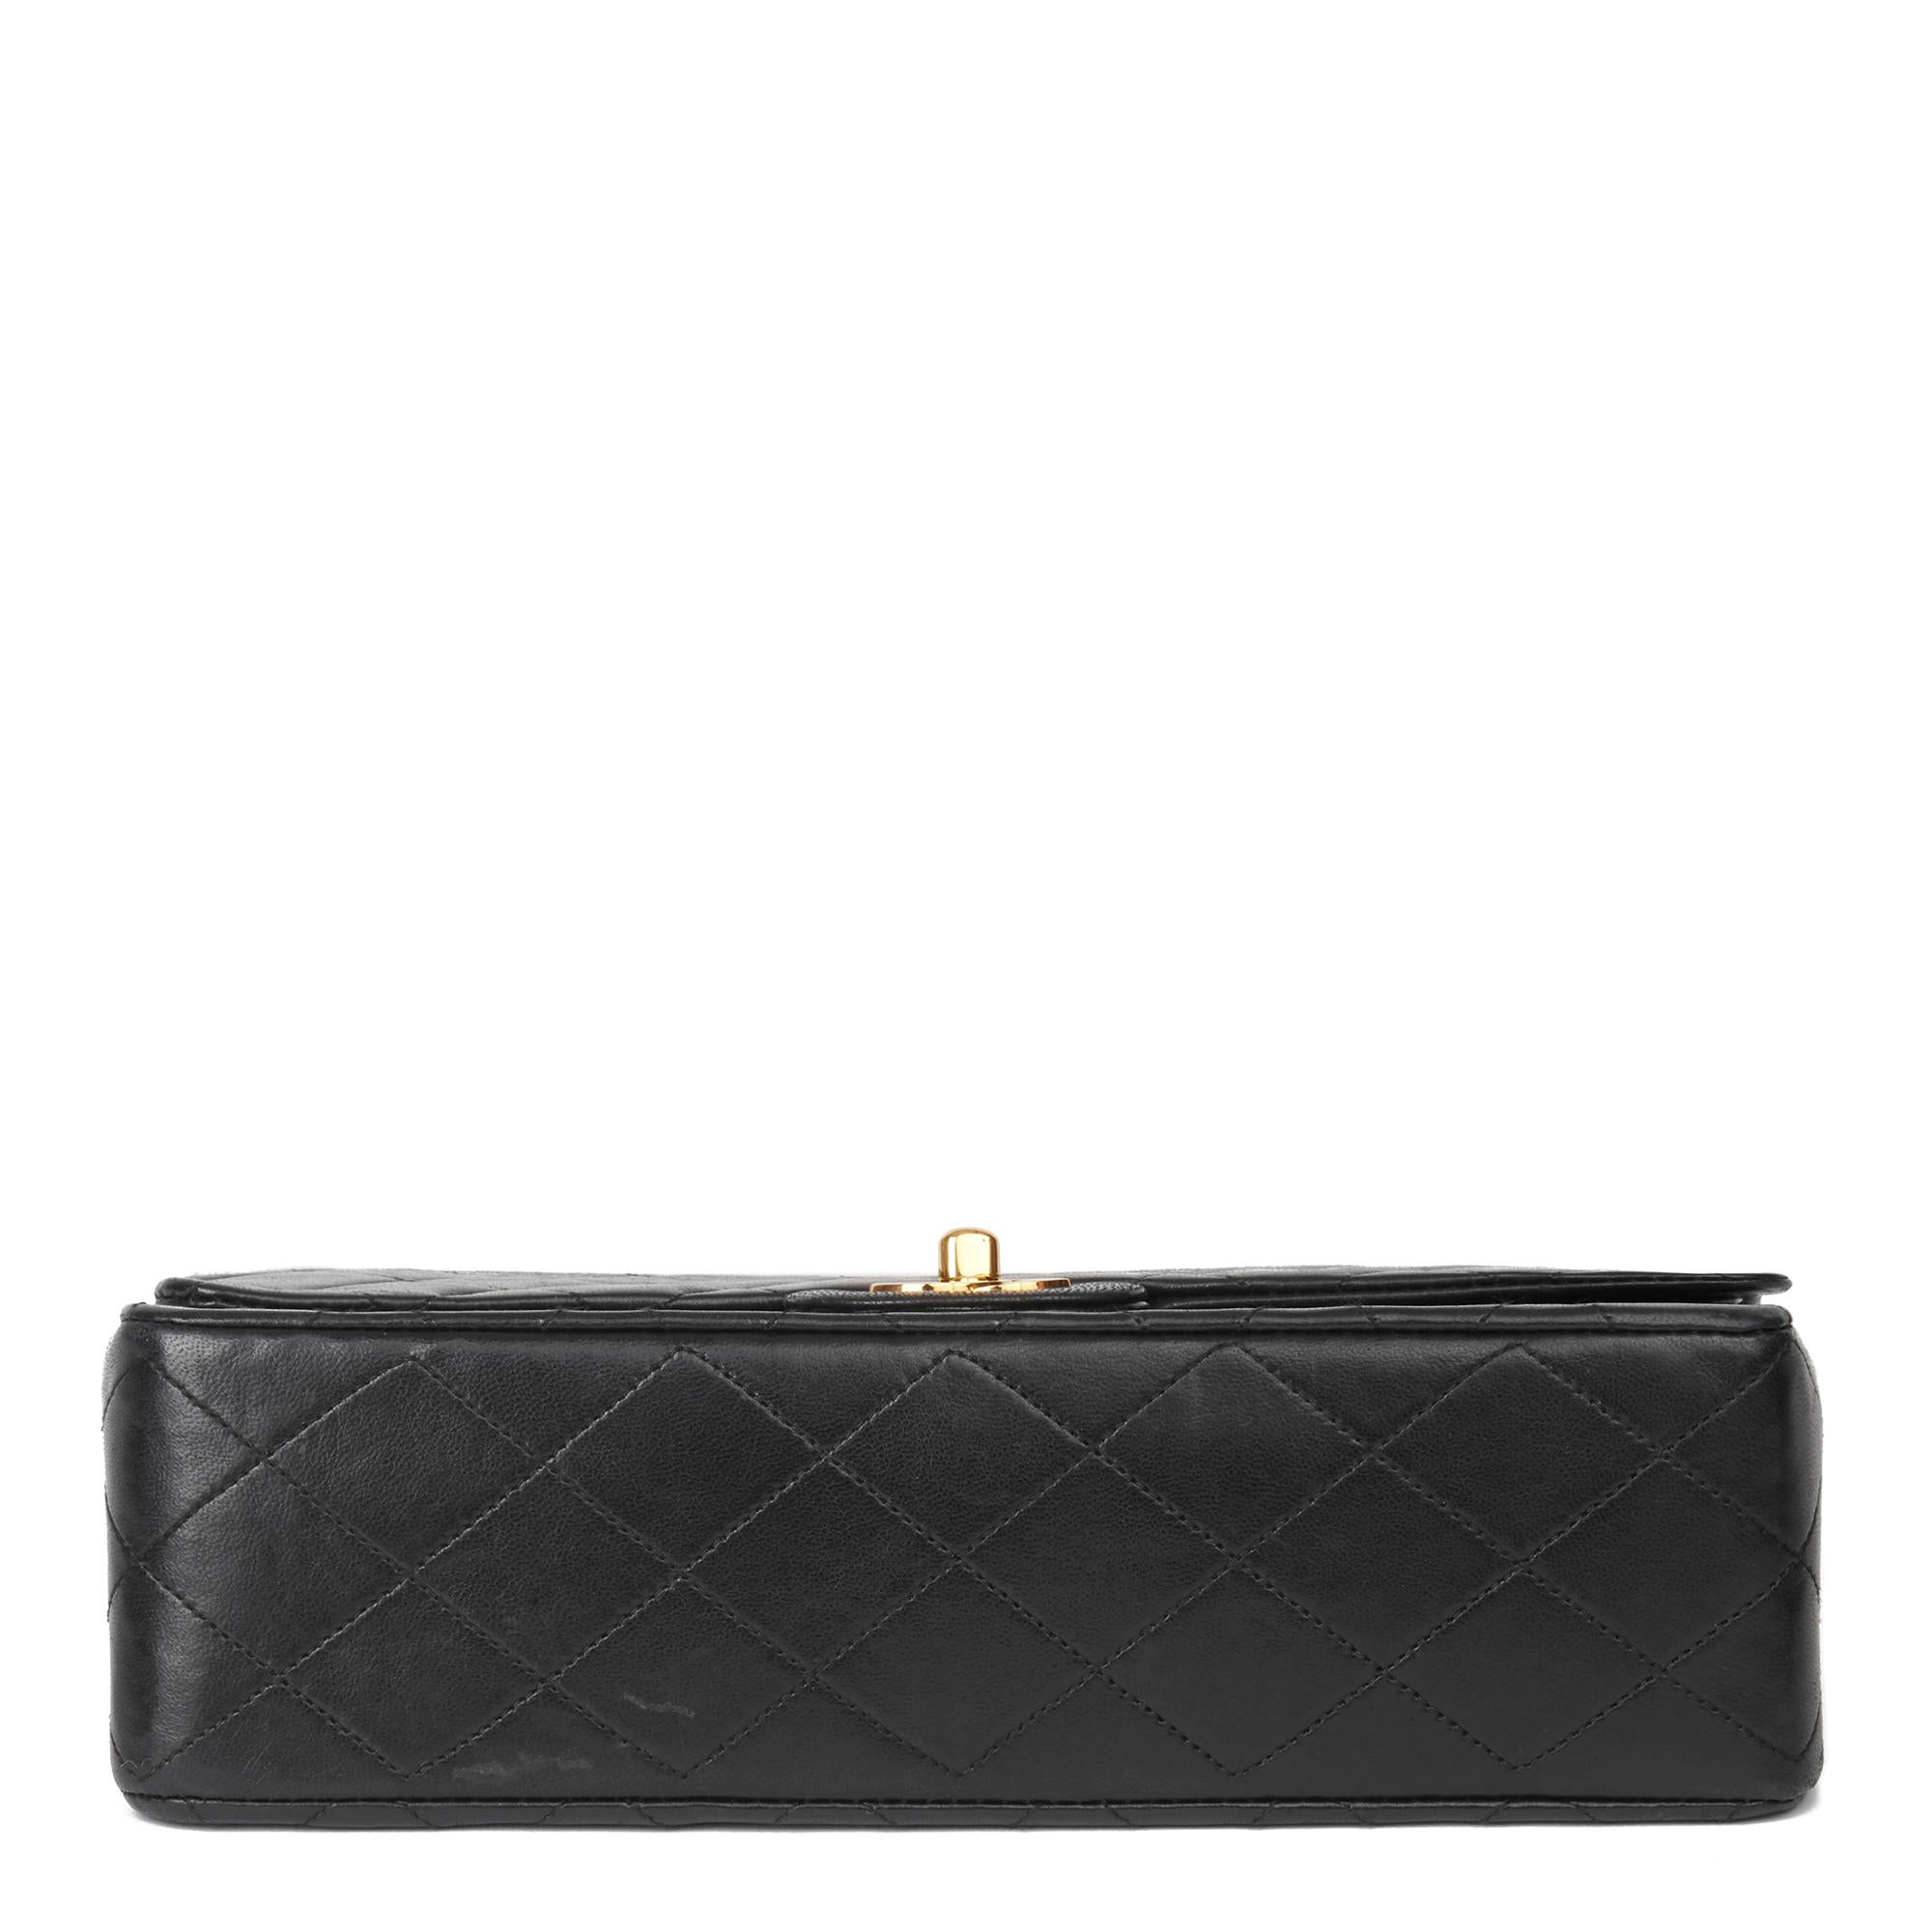 1990 Chanel Black Quilted Lambskin Vintage Medium Classic Double Flap Bag  1